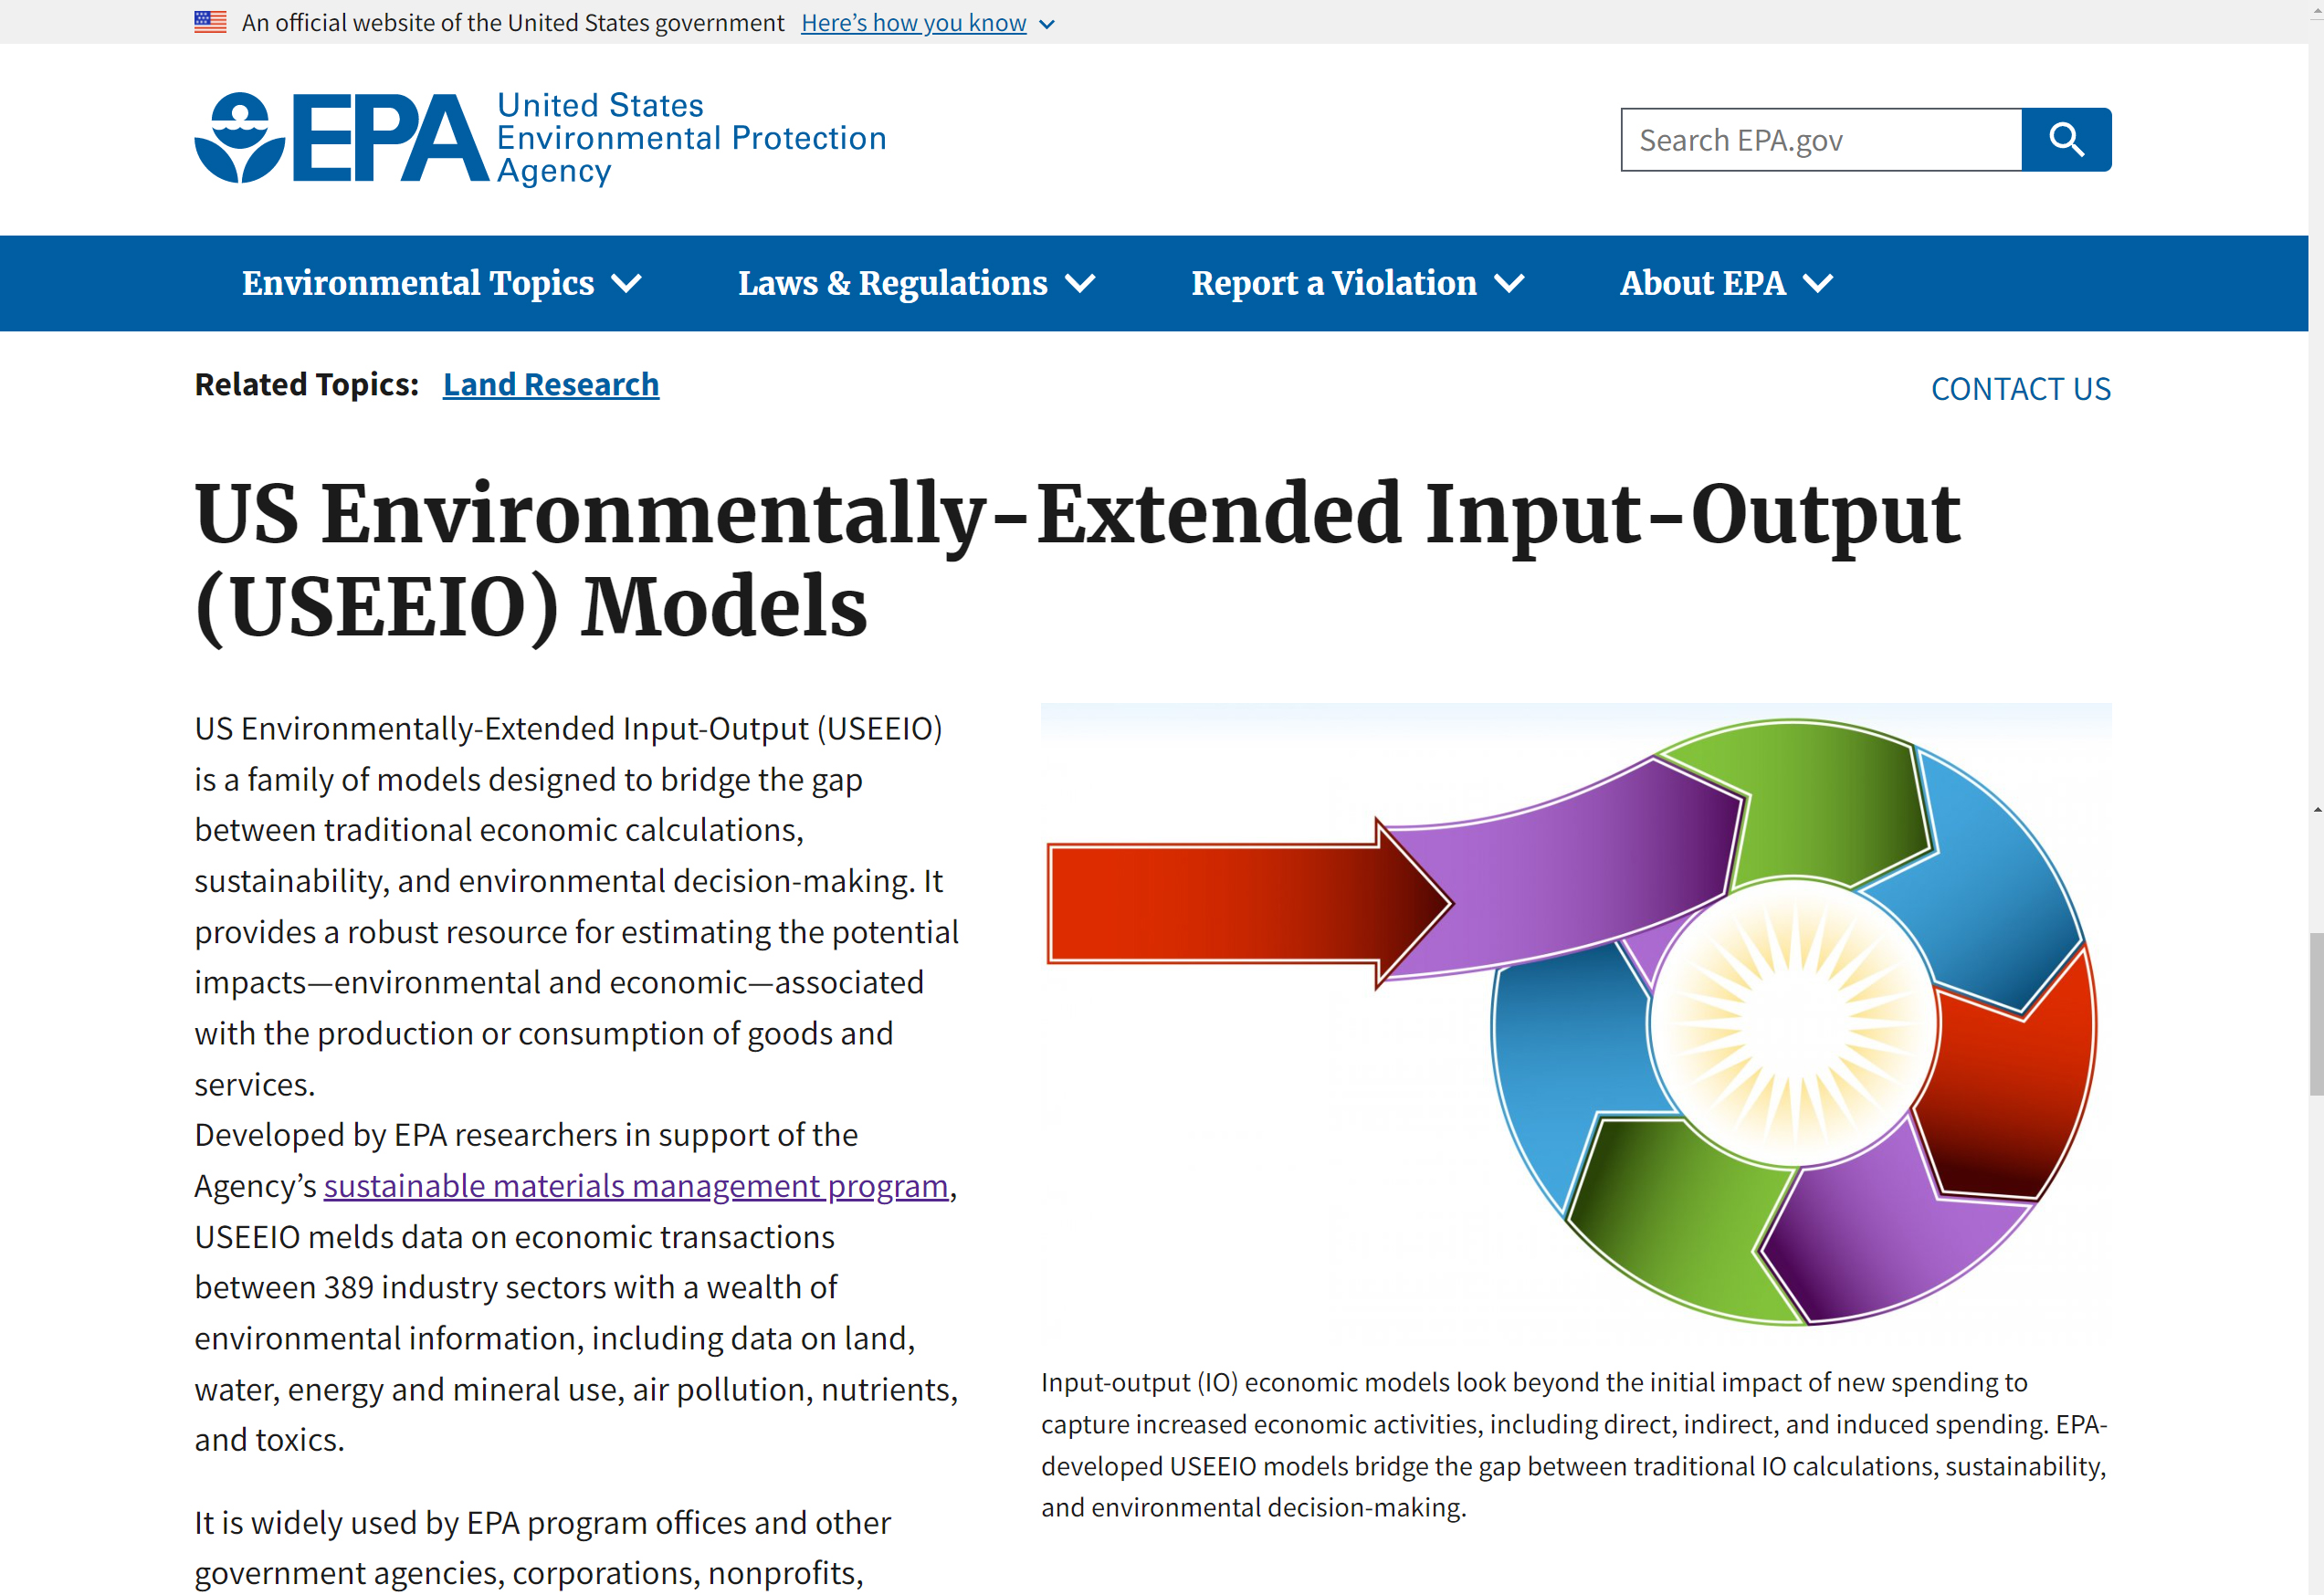 US EPA page topic of US Environmentally-Extended Input-Output (USEEIO) Models